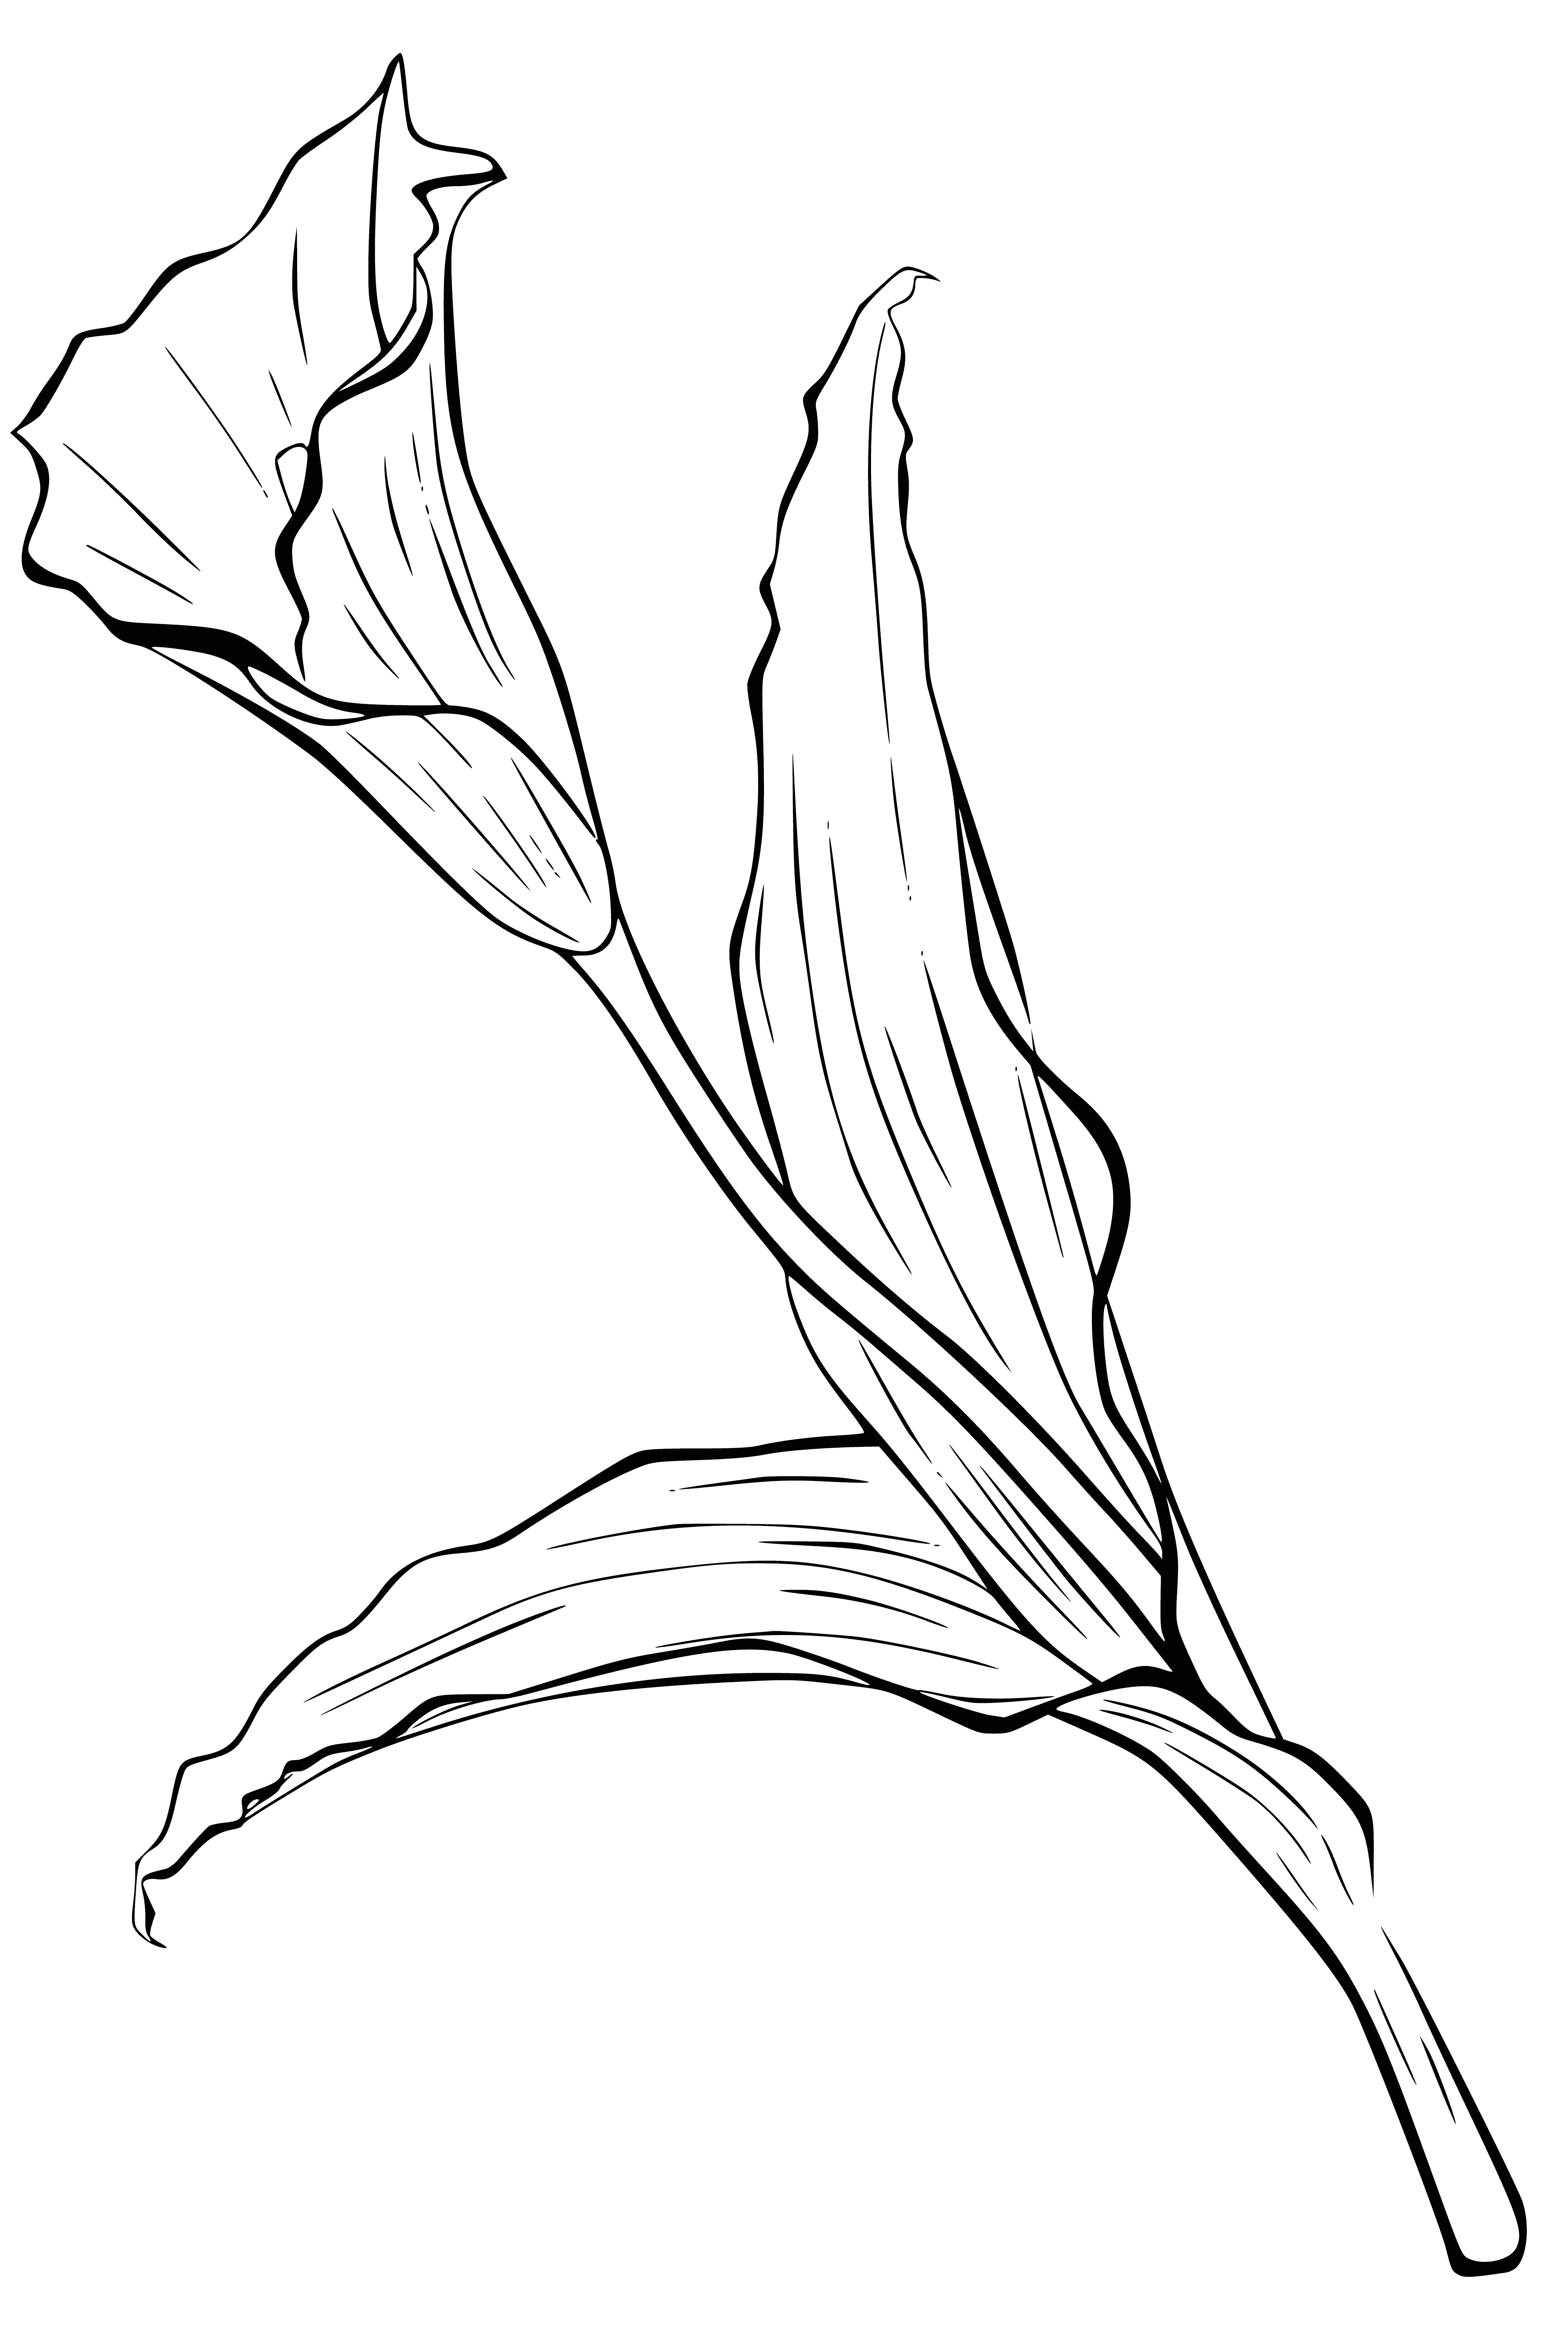 coloring page: Elegant calla lily with slender stem & smooth petals, wrapped in tight leaves. White with small yellow center. Eye-catching & graceful.